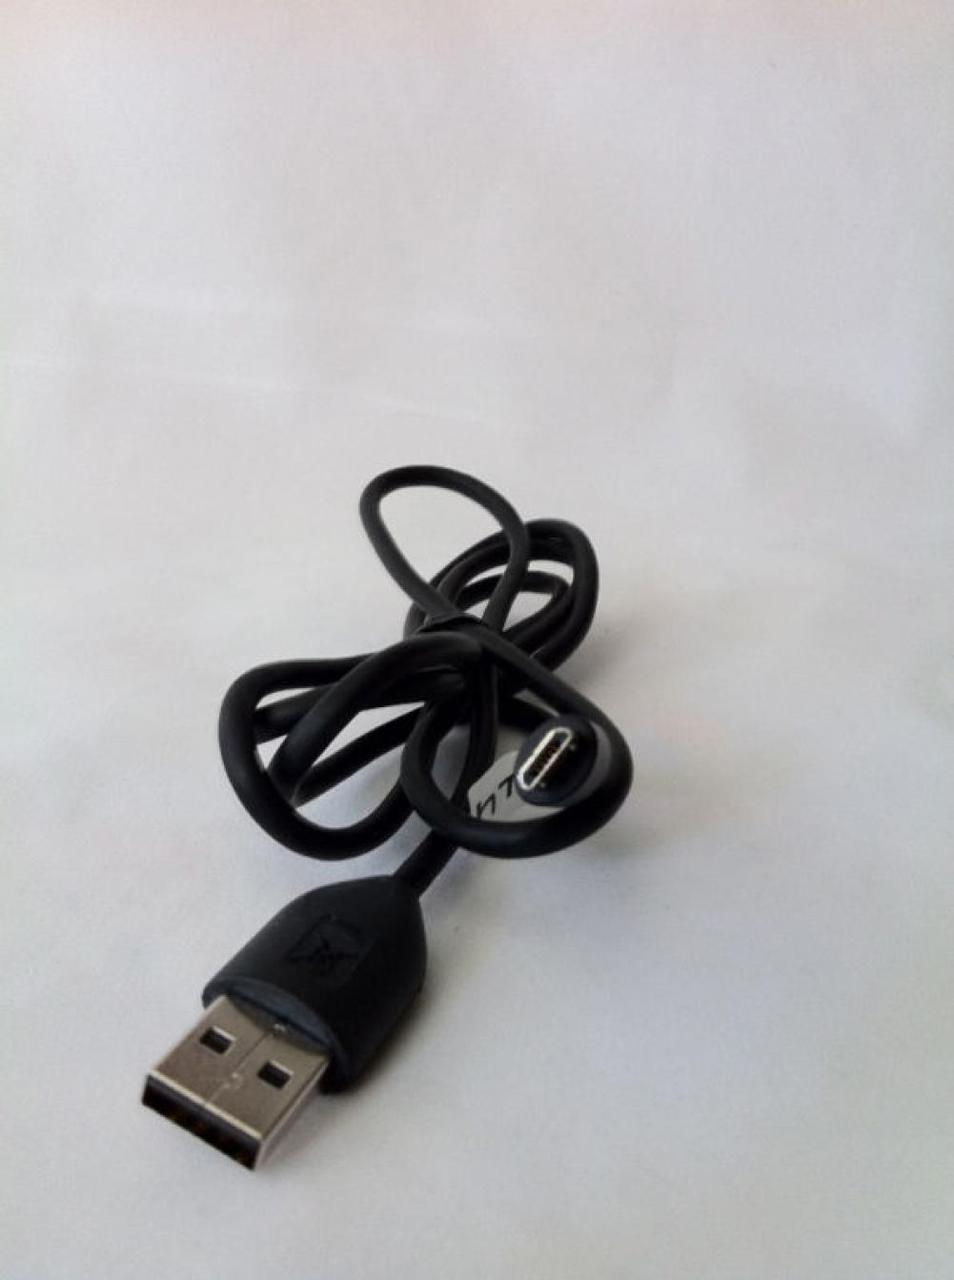 Micro-USB cell phone sync cable